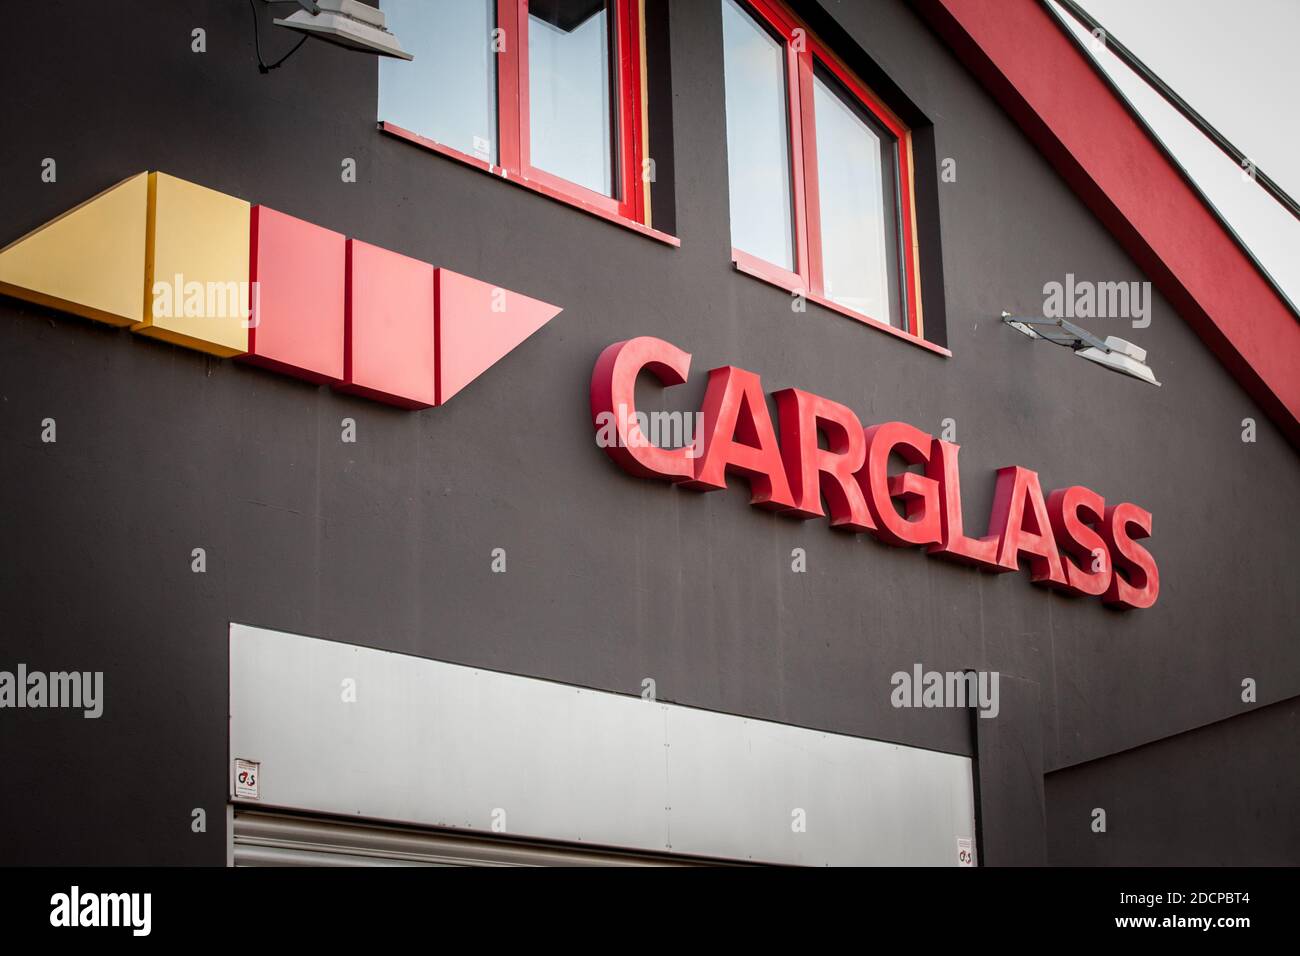 BELGRADE, SERBIA - OCTOBER 25, 2020: Carglass logo ion their workshop. Carglass is a Belgian chain of mechanics & technicians specialized in automotiv Stock Photo